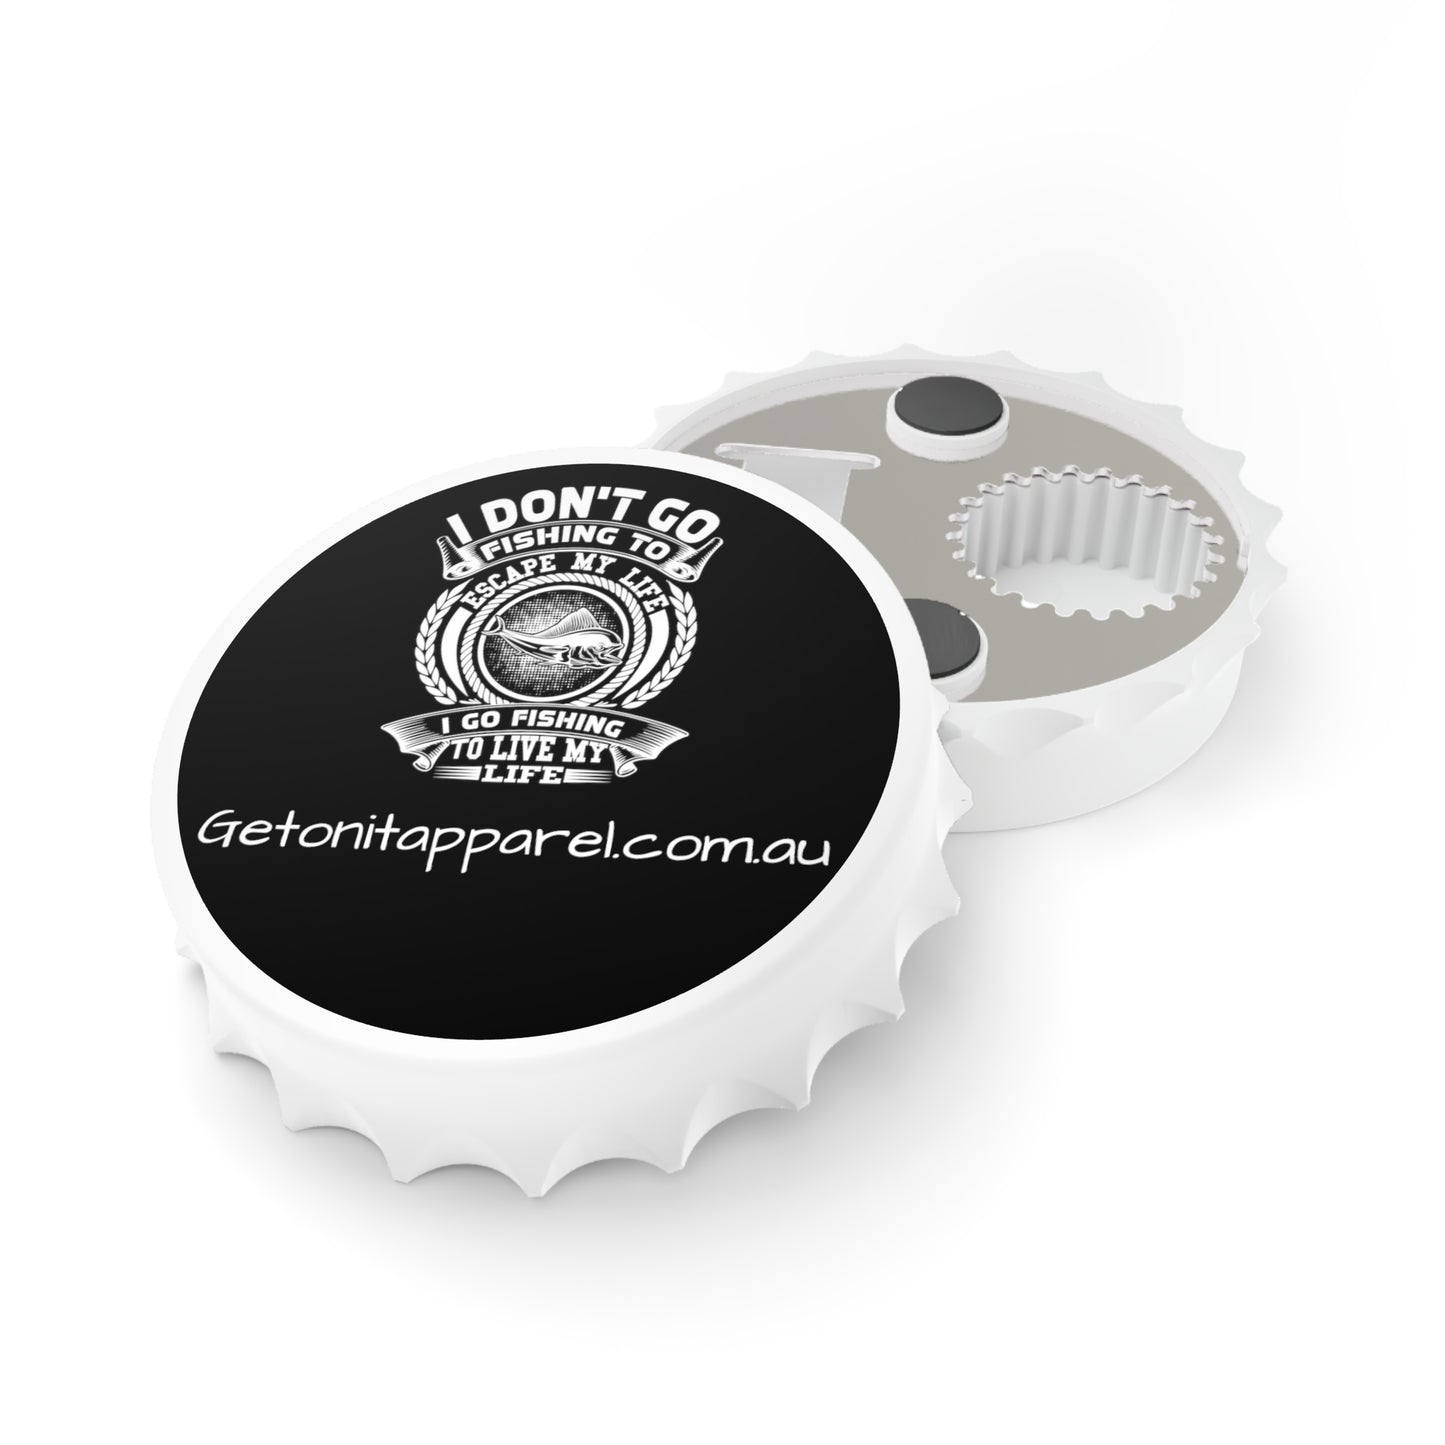 Magnetic Bottle Opener - I Don't Go Fishing To Escape My Life I Go Fishing To Live My Life